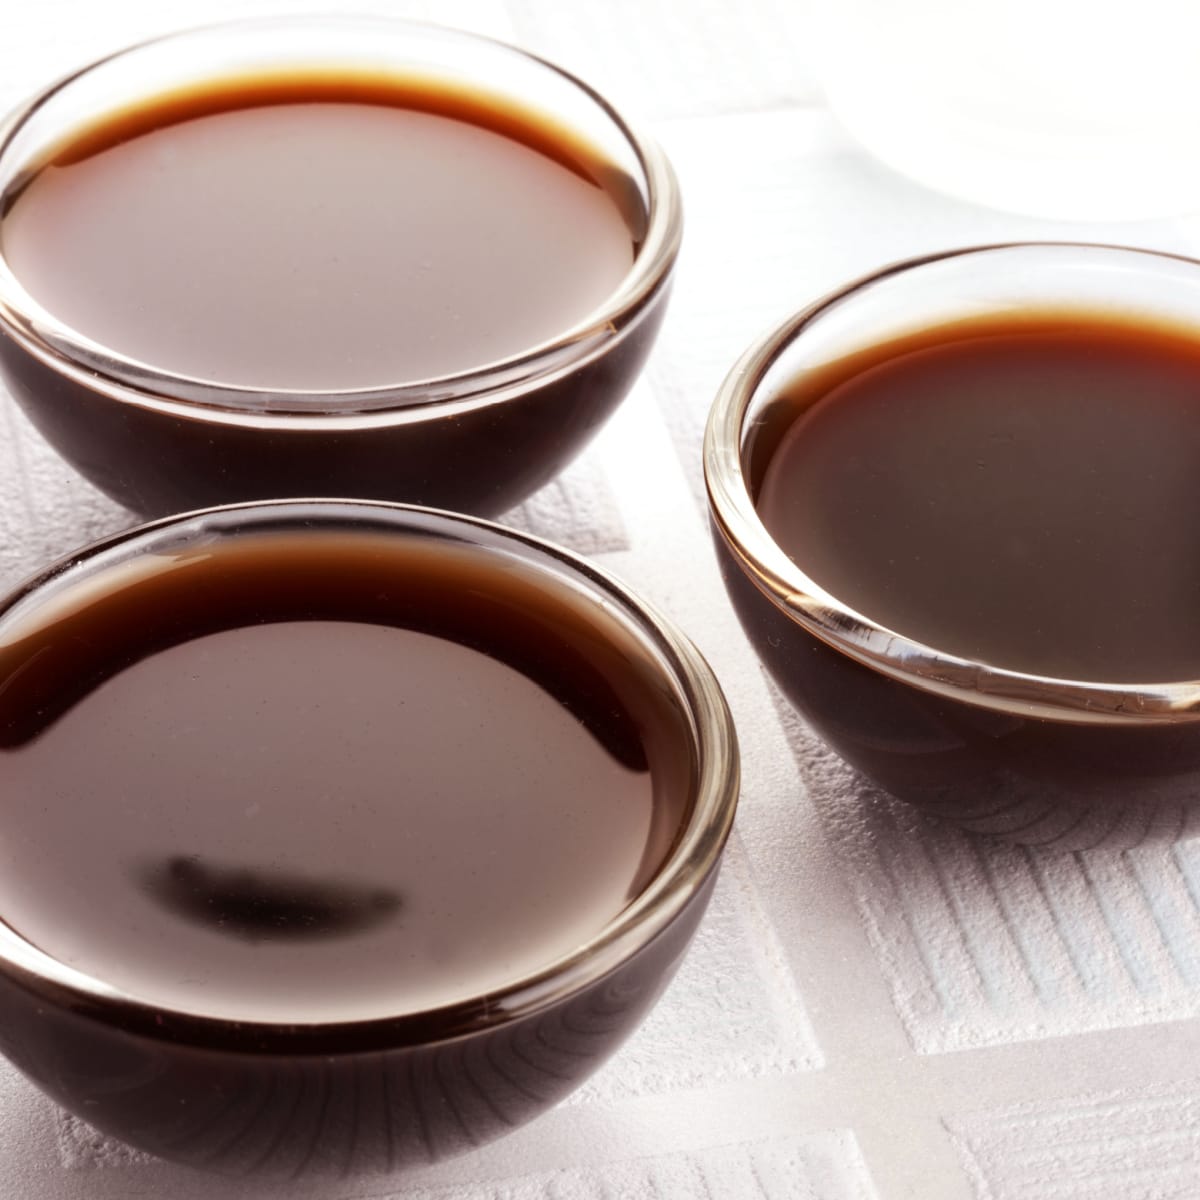 Three Bowls of Worcestershire Sauce on a Table